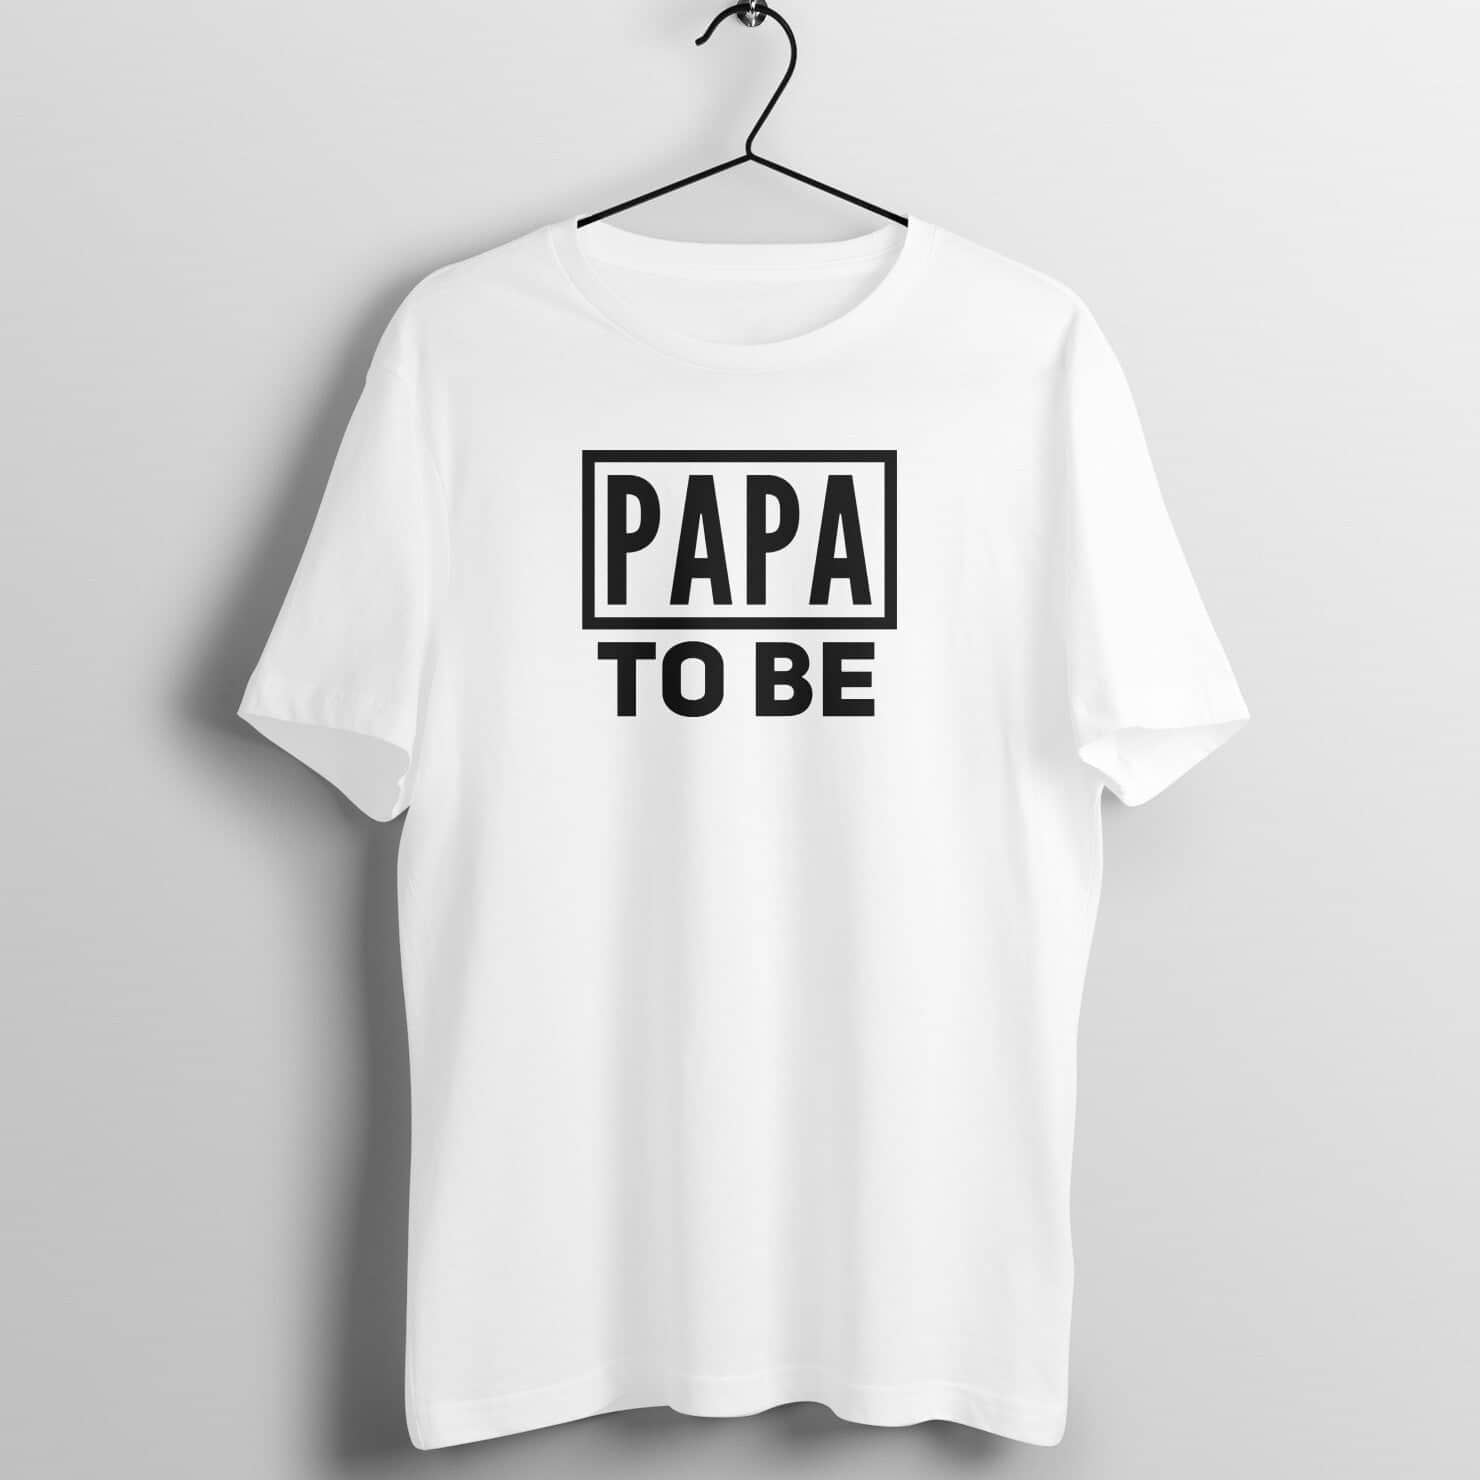 Papa To Be Special White T Shirt for Men Shirts & Tops Printrove White S 